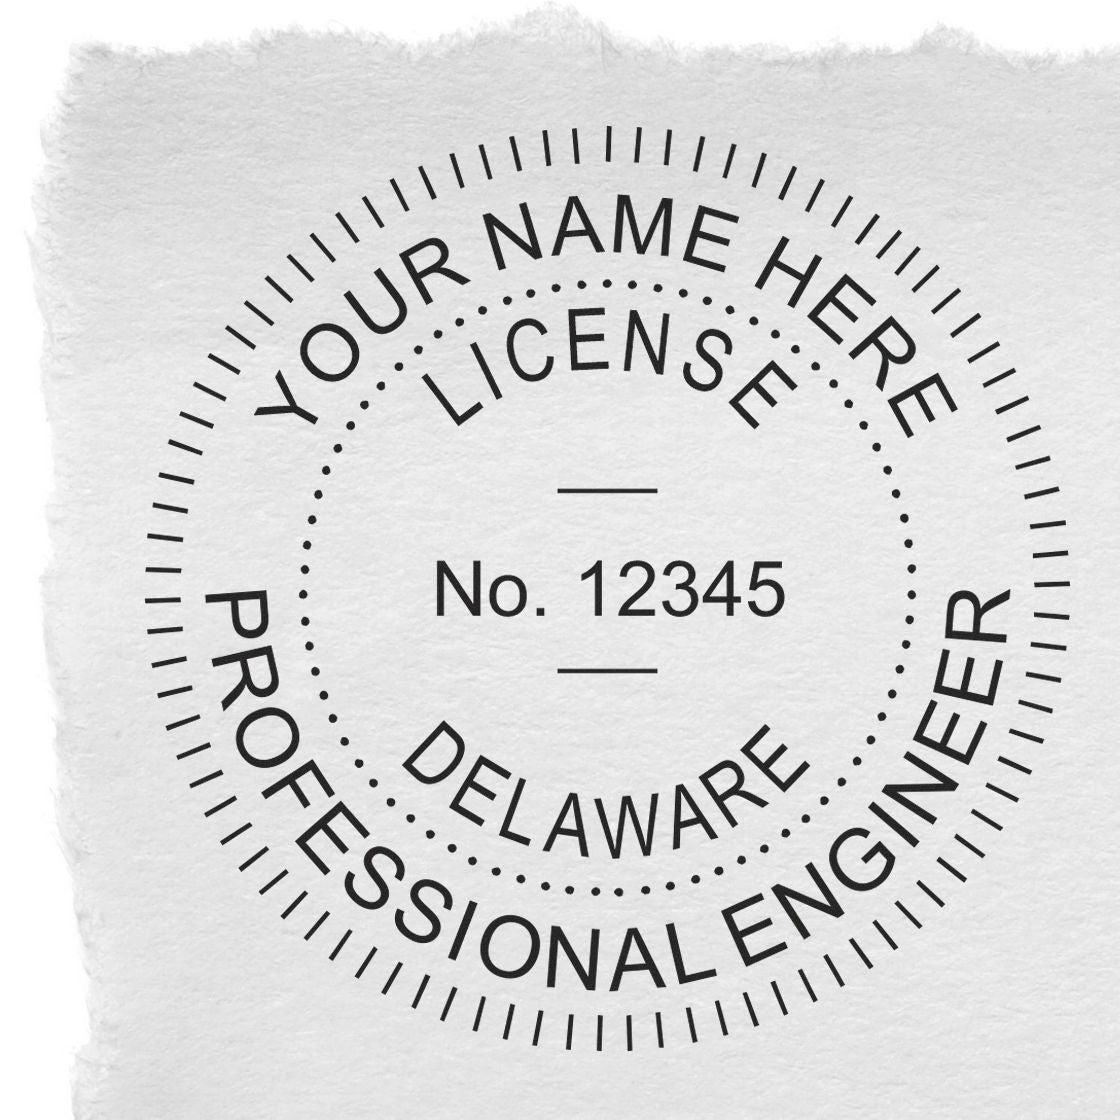 A stamped impression of the Premium MaxLight Pre-Inked Delaware Engineering Stamp in this stylish lifestyle photo, setting the tone for a unique and personalized product.